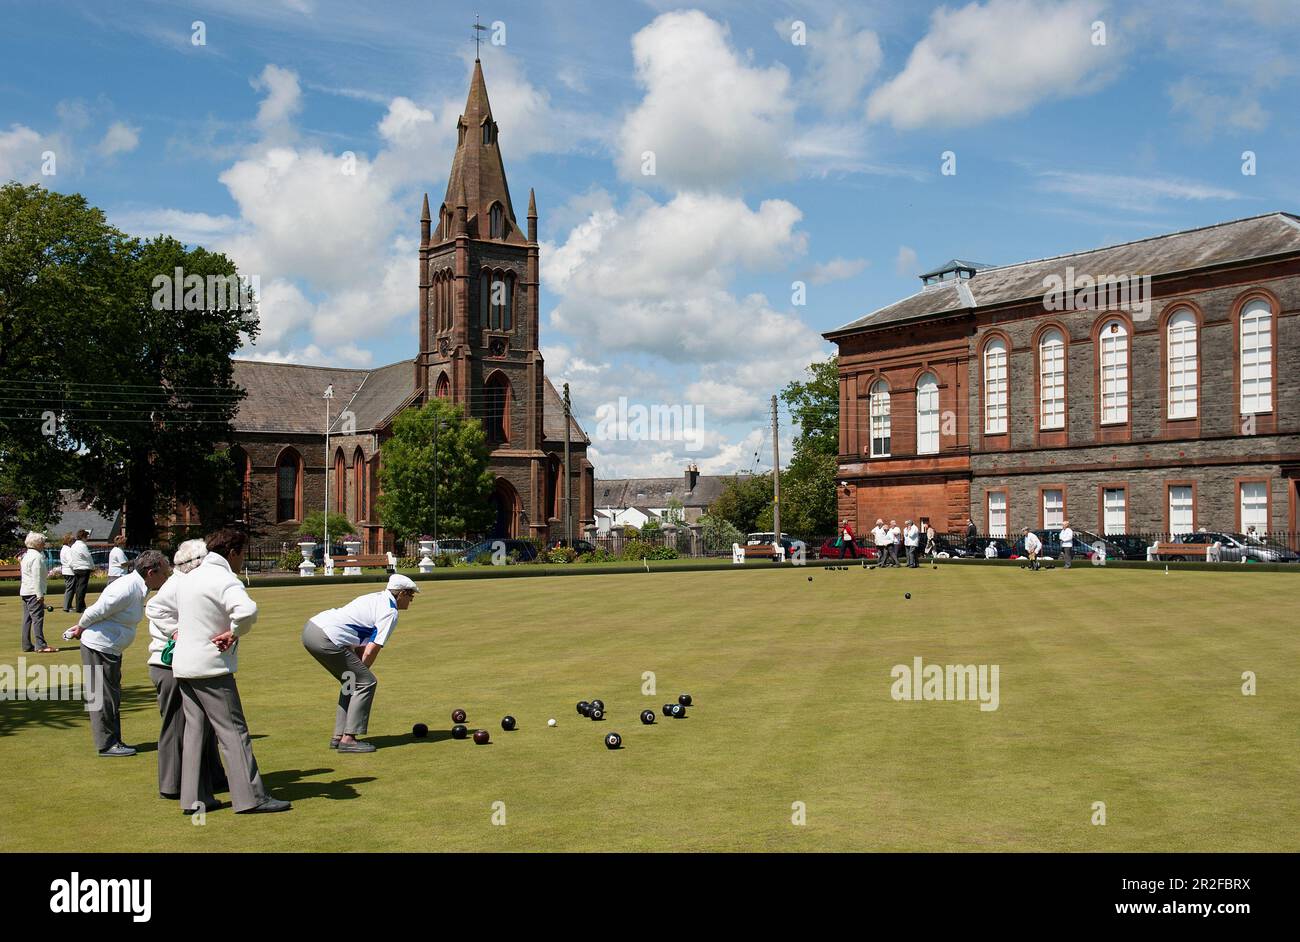 Bowls in play at the Kirkcudbright lawn bowling green in Dumfries and Galloway, Scotland, UK Stock Photo